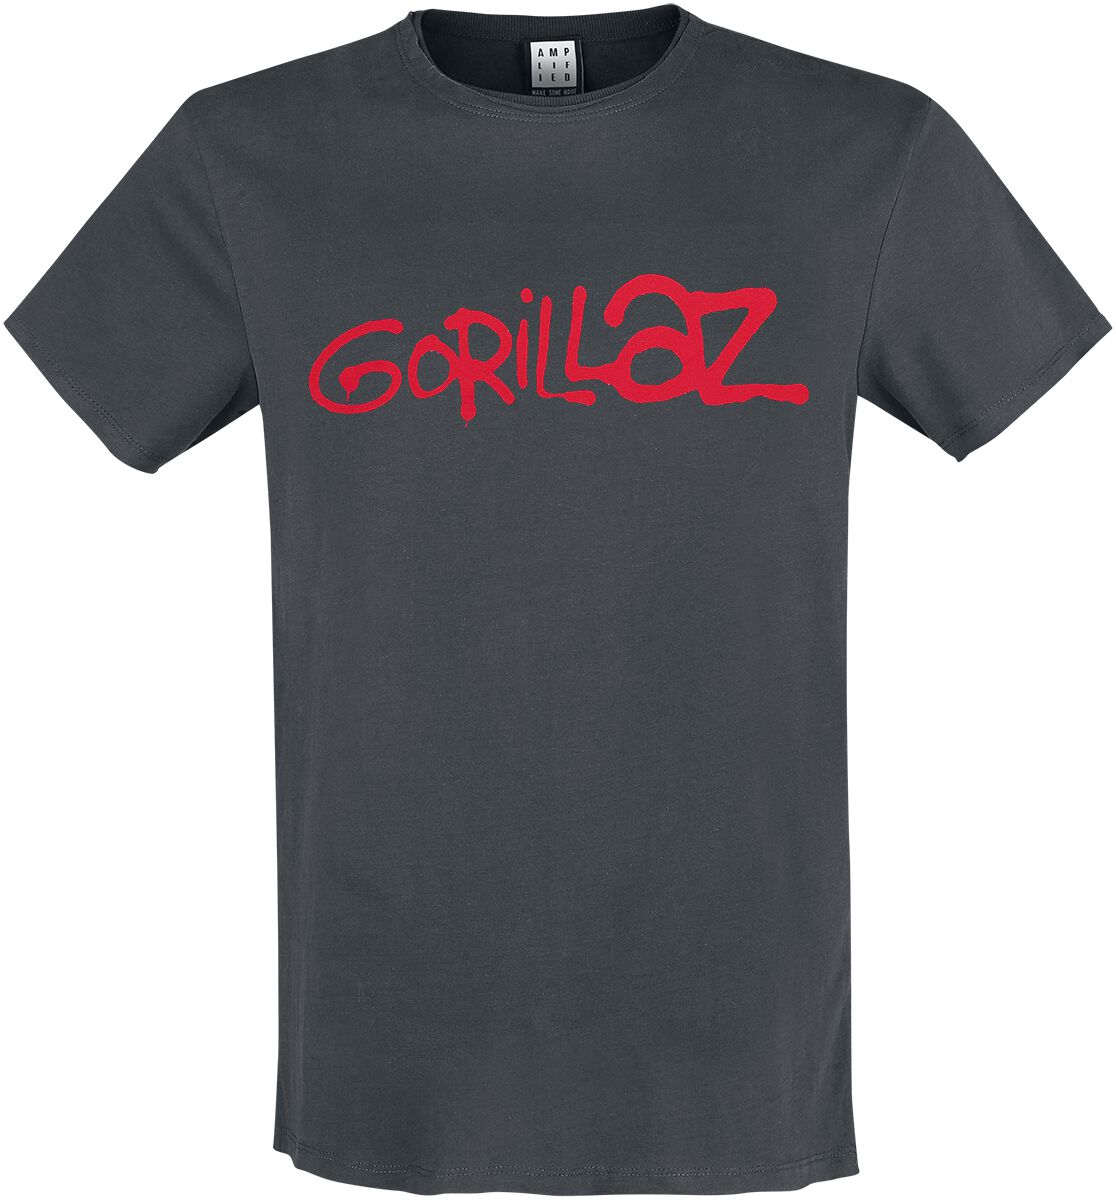 Gorillaz Amplified Collection - Logo T-Shirt charcoal